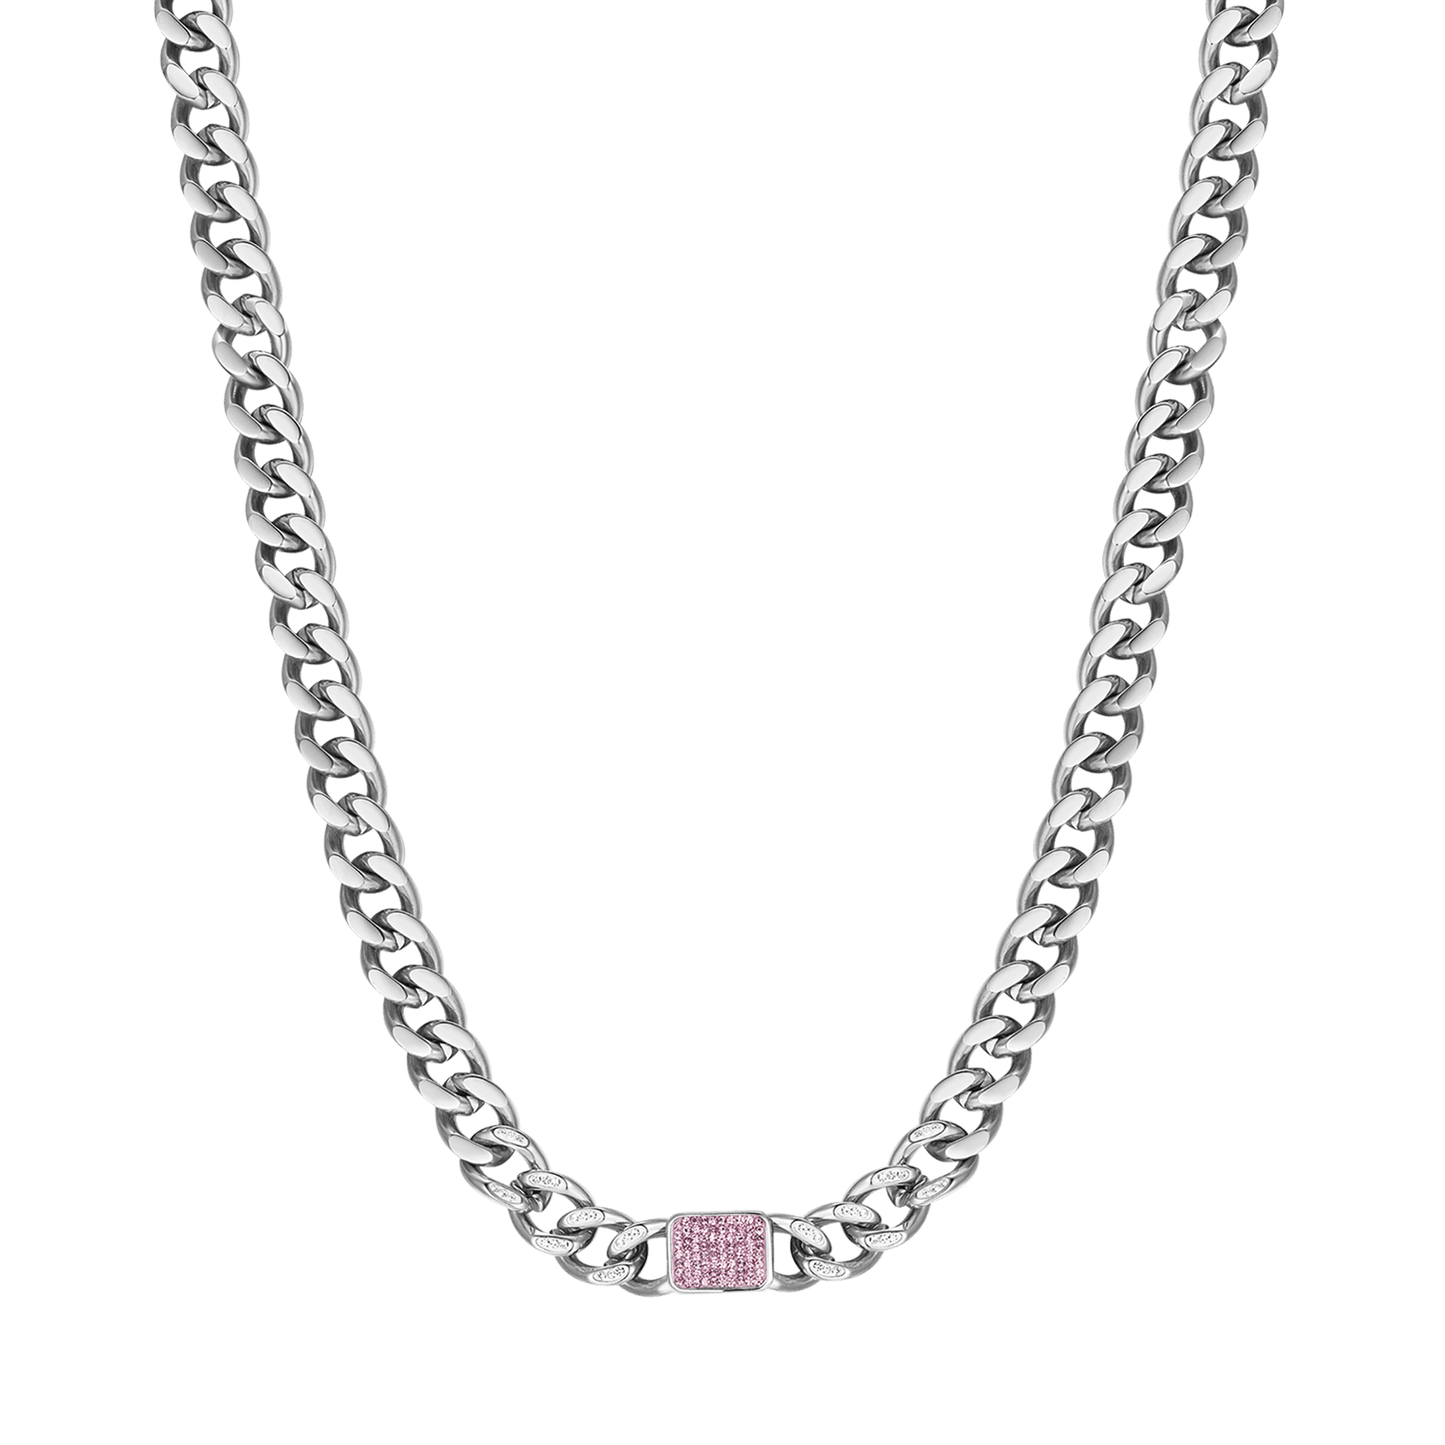 STEEL WOMEN'S NECKLACE WITH FUCHSIA CRYSTALS